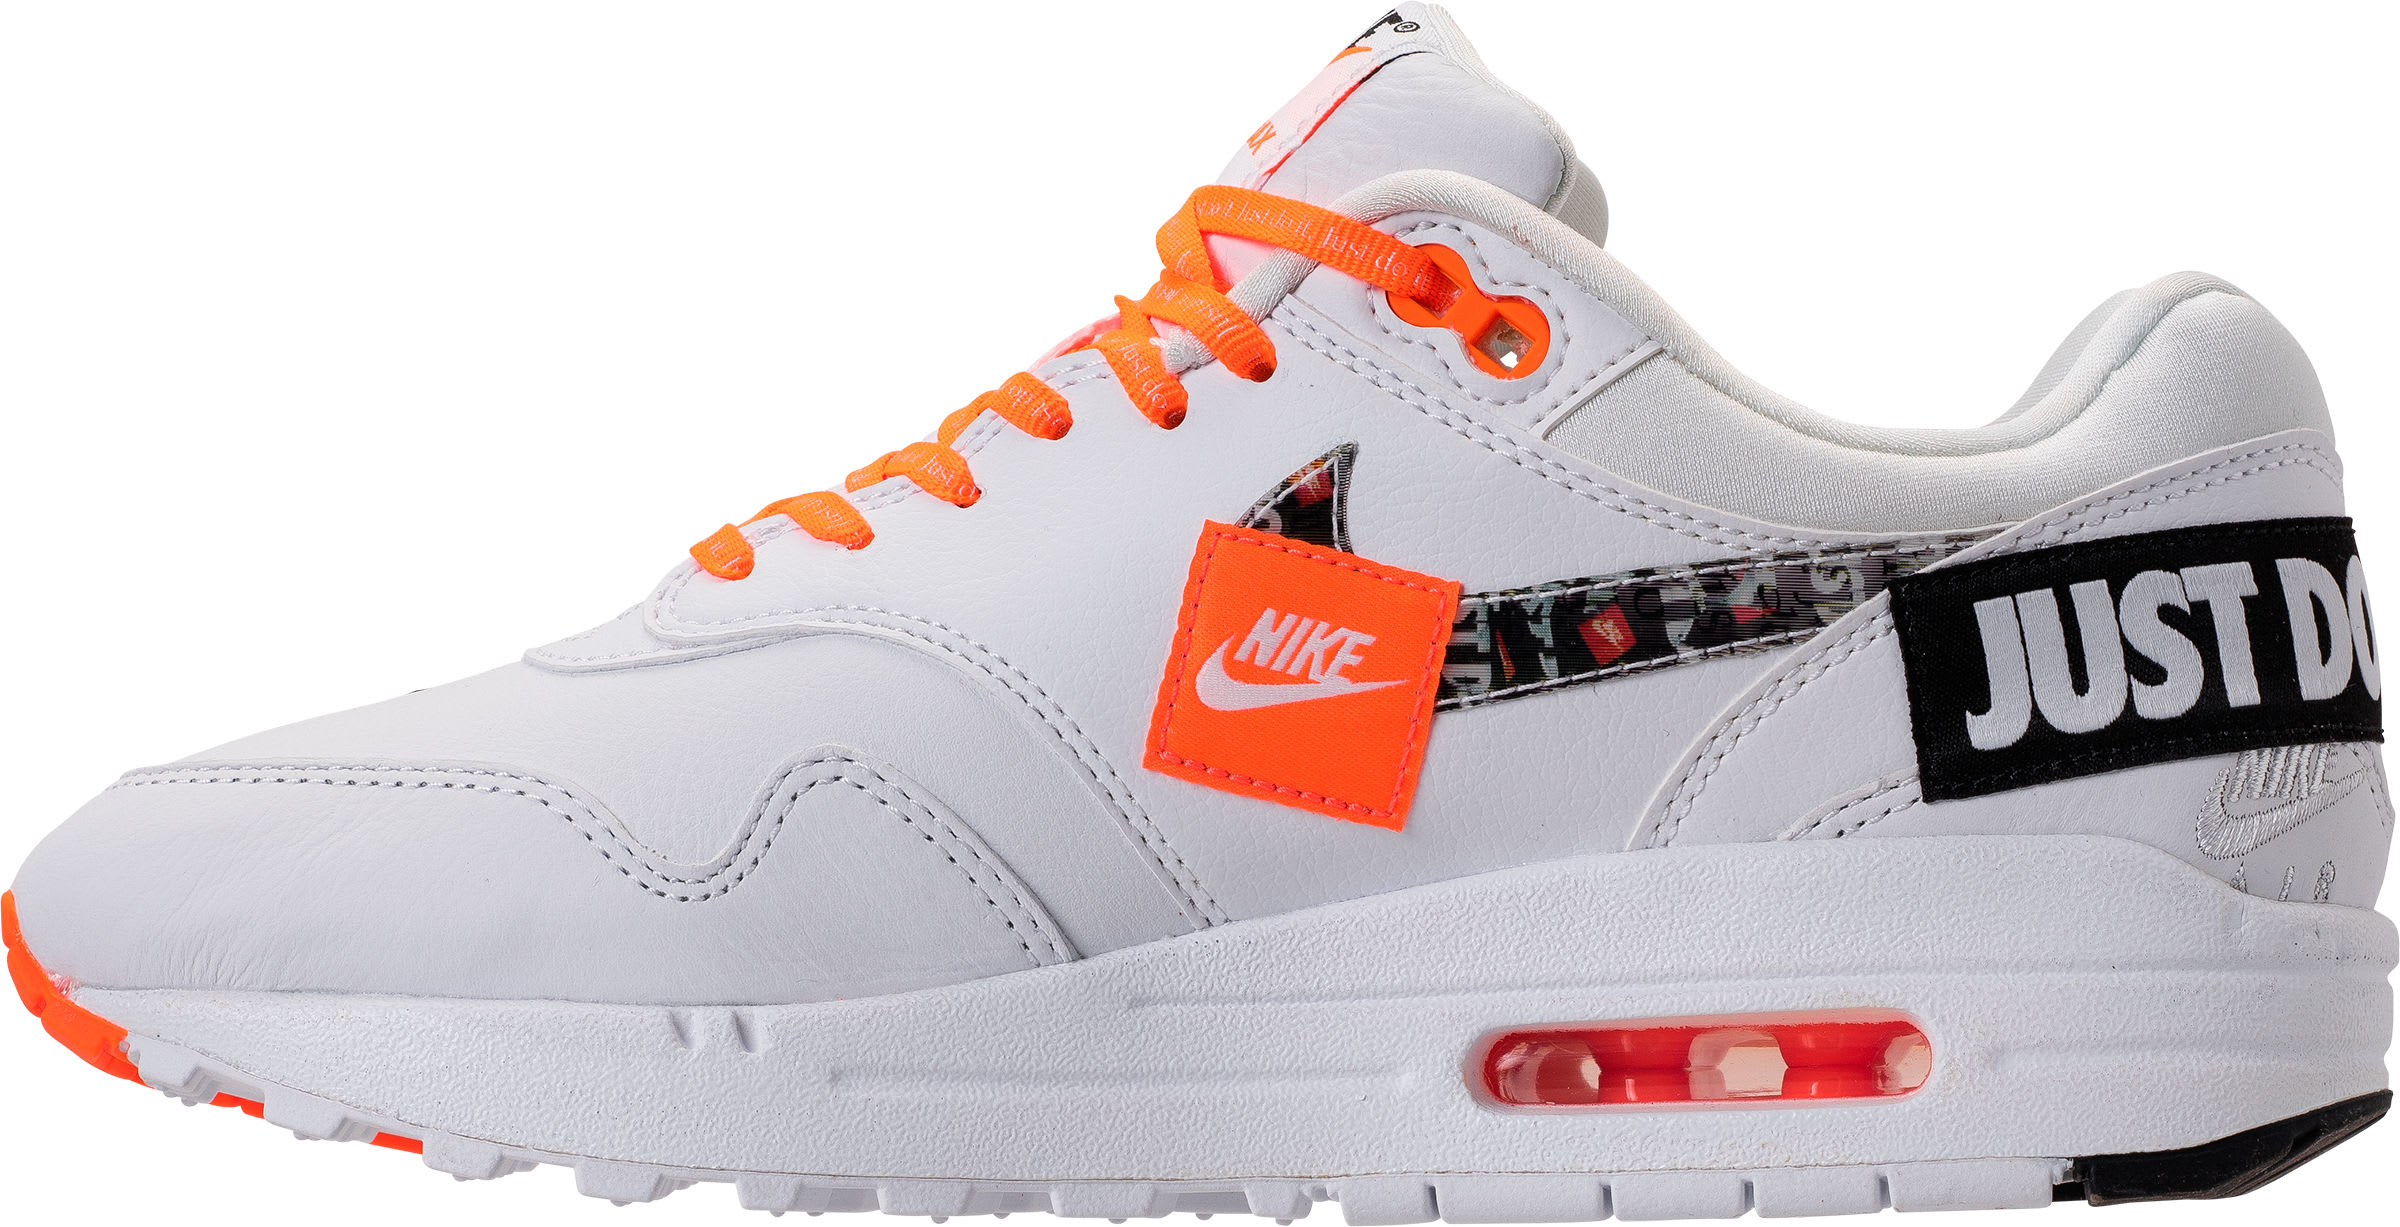 Nike Air Max 1 Just Do It White Release Date 917691-100 Medial